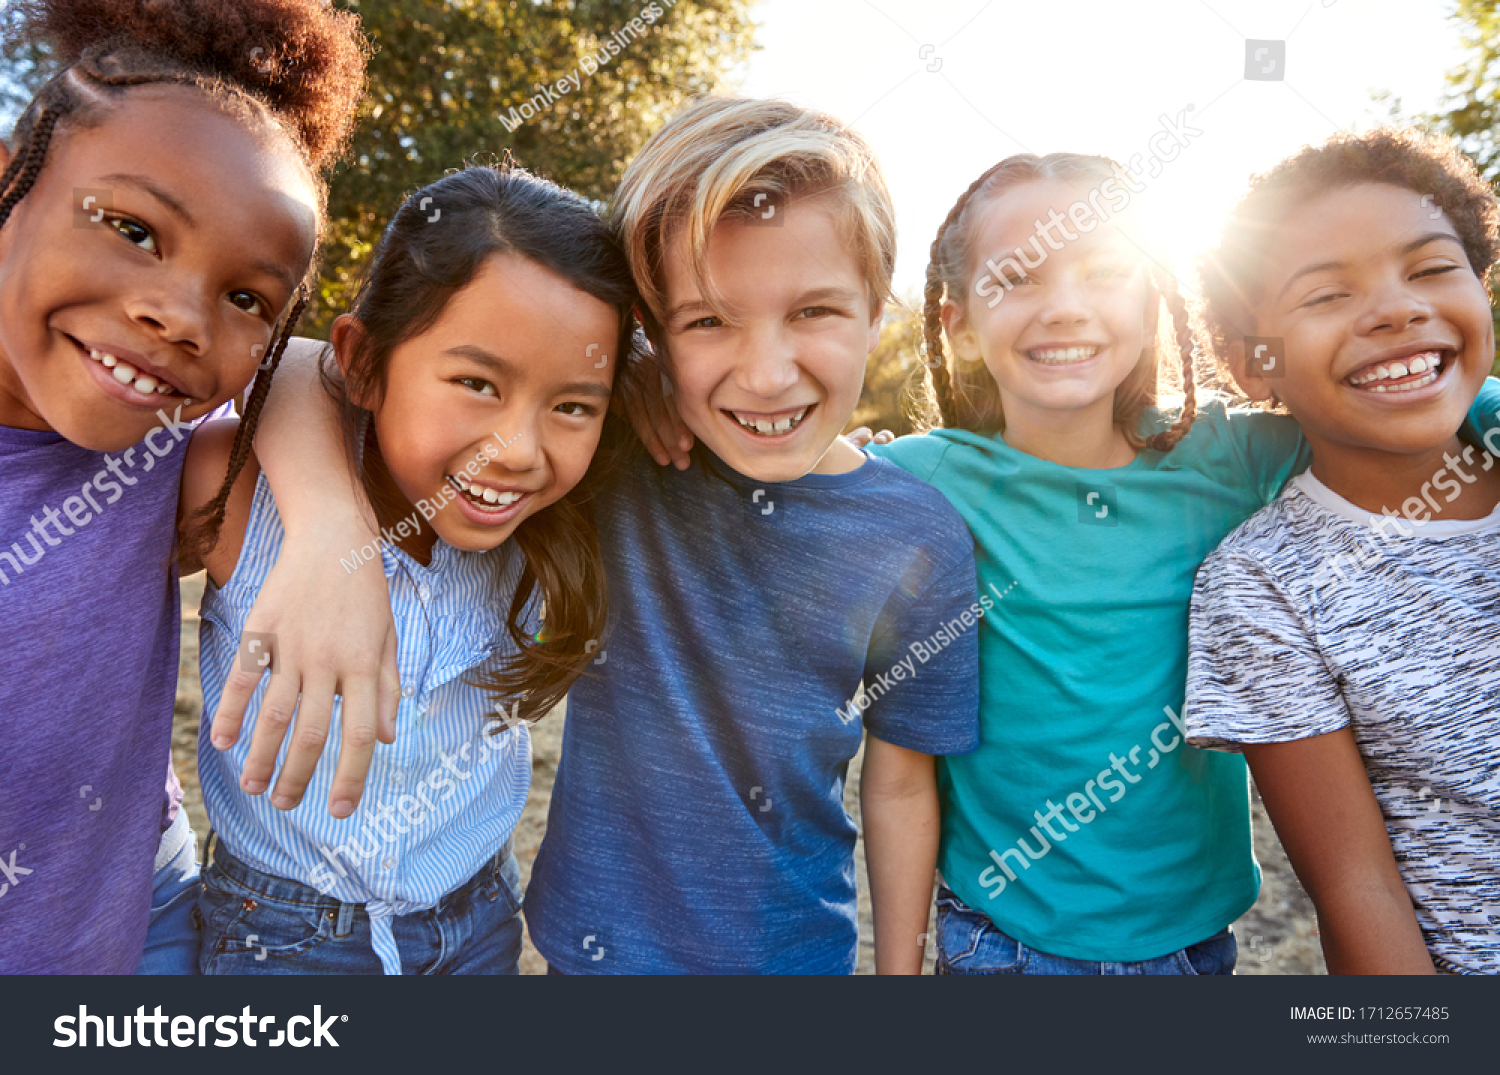 Portrait Of Multi-Cultural Children Hanging Out With Friends In Countryside Together #1712657485